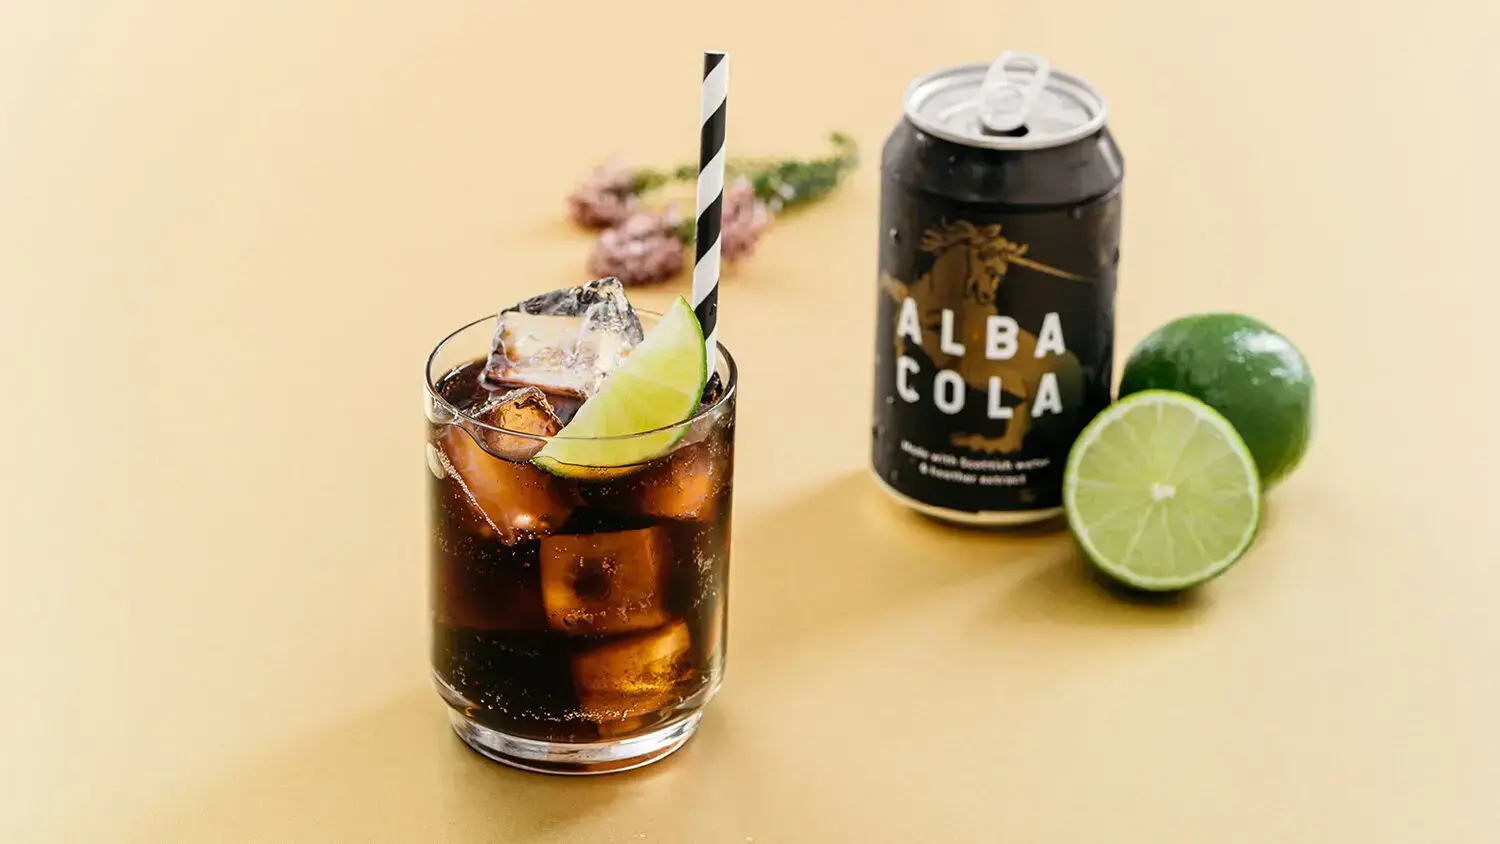 the-january-project-shop-small-handmade-gifts-Alba Cola-entry-img